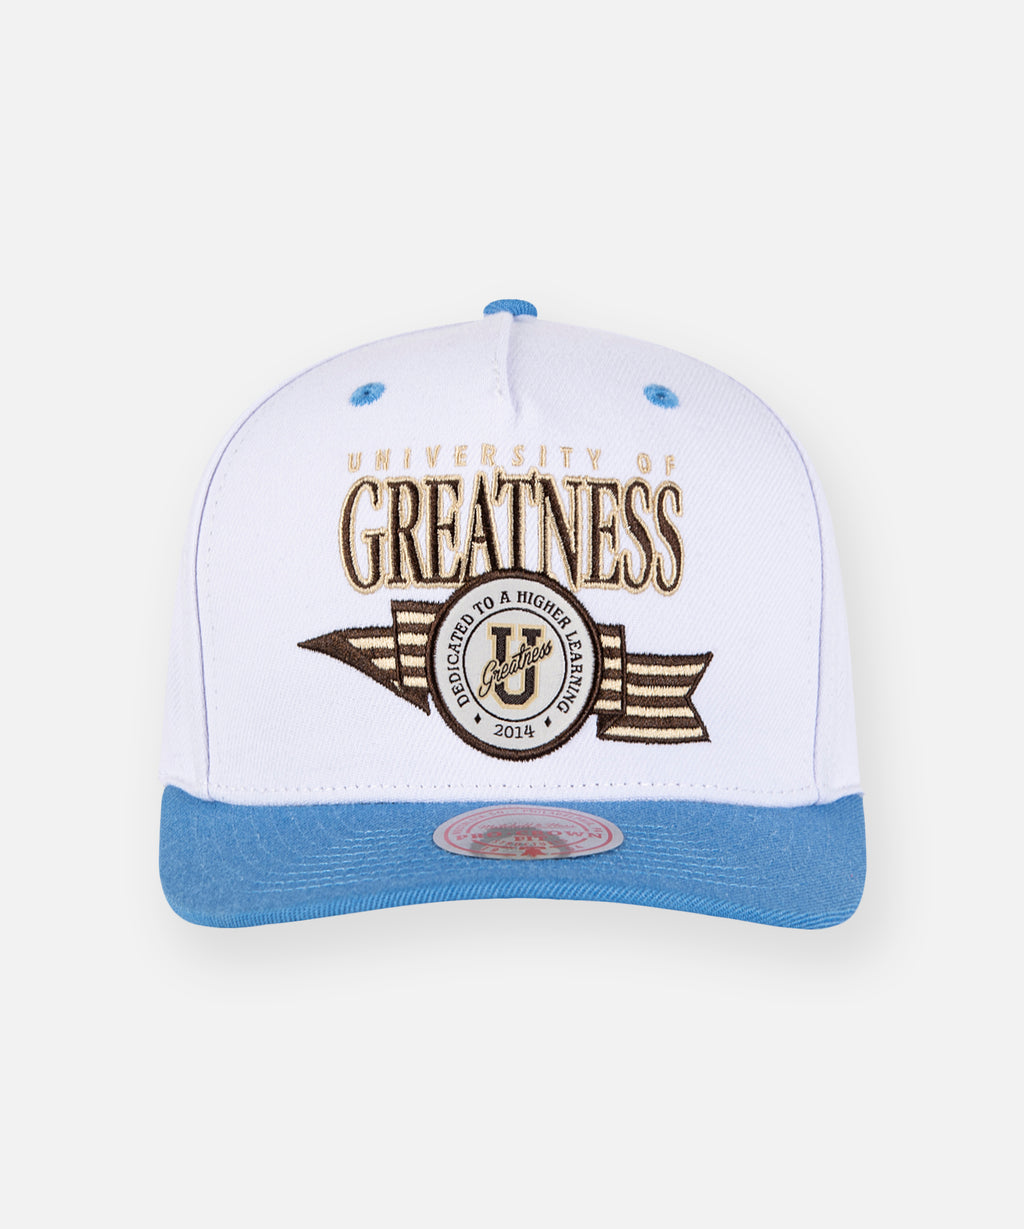  Paper Planes University of Greatness A-Frame Curved Visor.